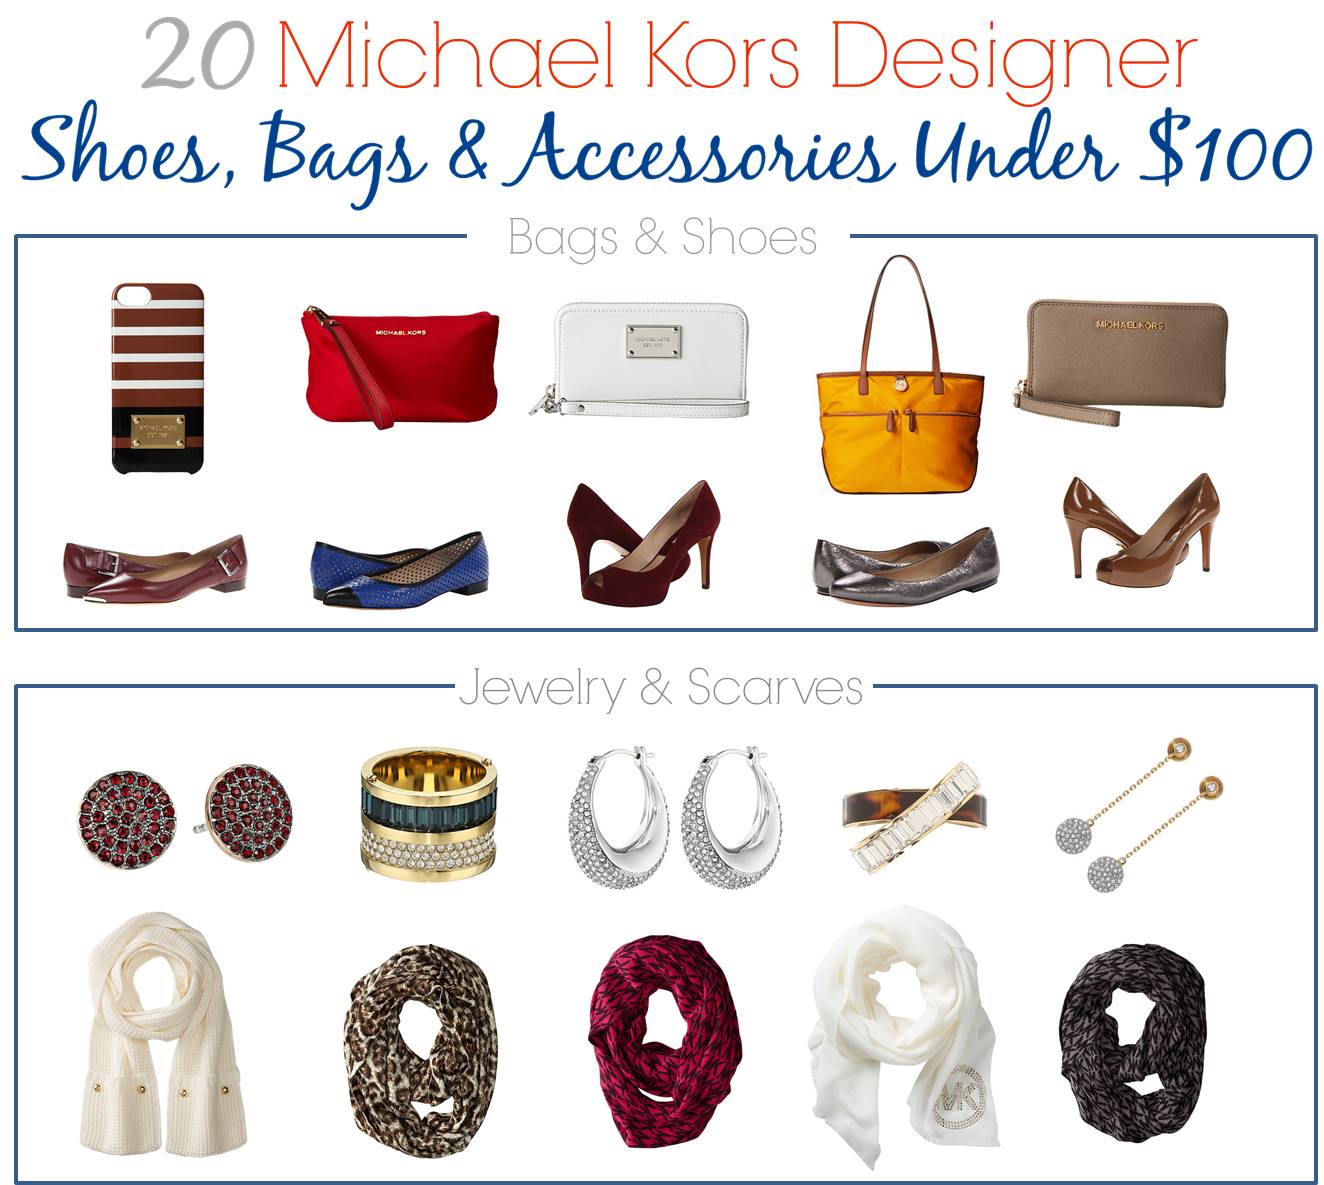 Looking for fabulous teen fashion accessories that don't cost a fortune? These Michael Kors Designer accessories are all under $100, but make a huge impact.